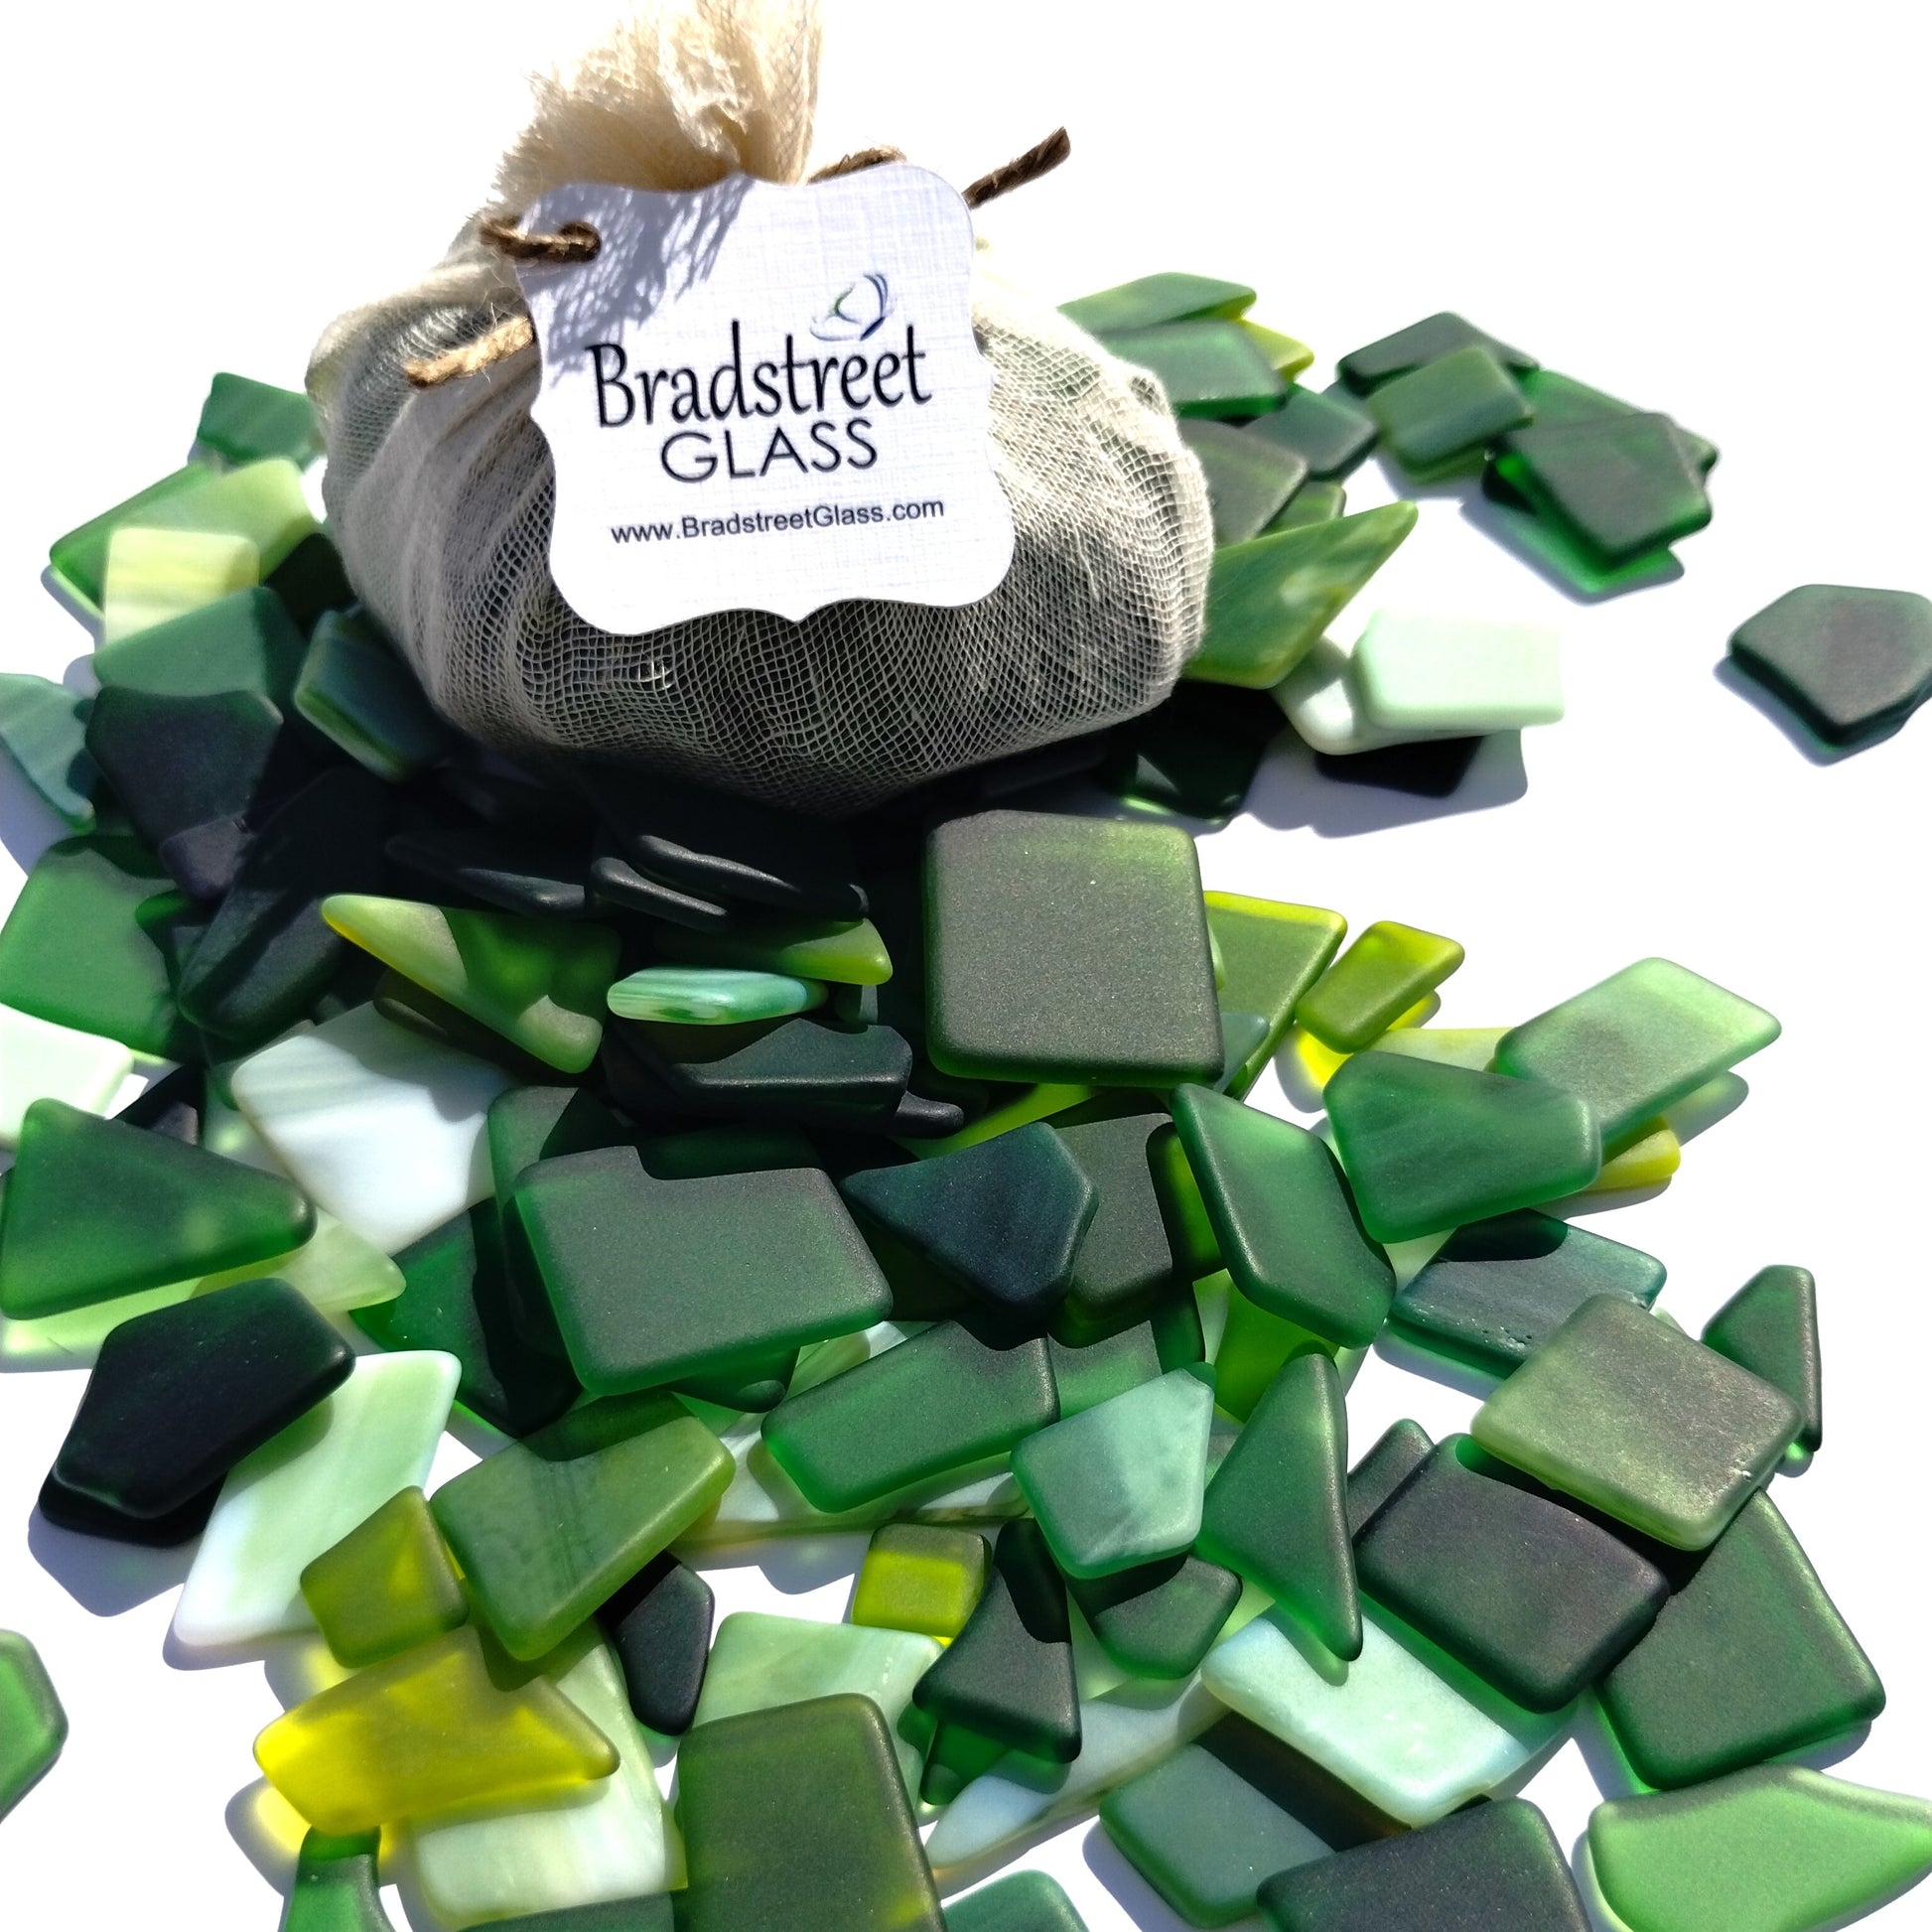 Bradstreet Glass Green Tumbled Stained Glass 1/2 LB "Sea Glass" Pieces in Shades of Green